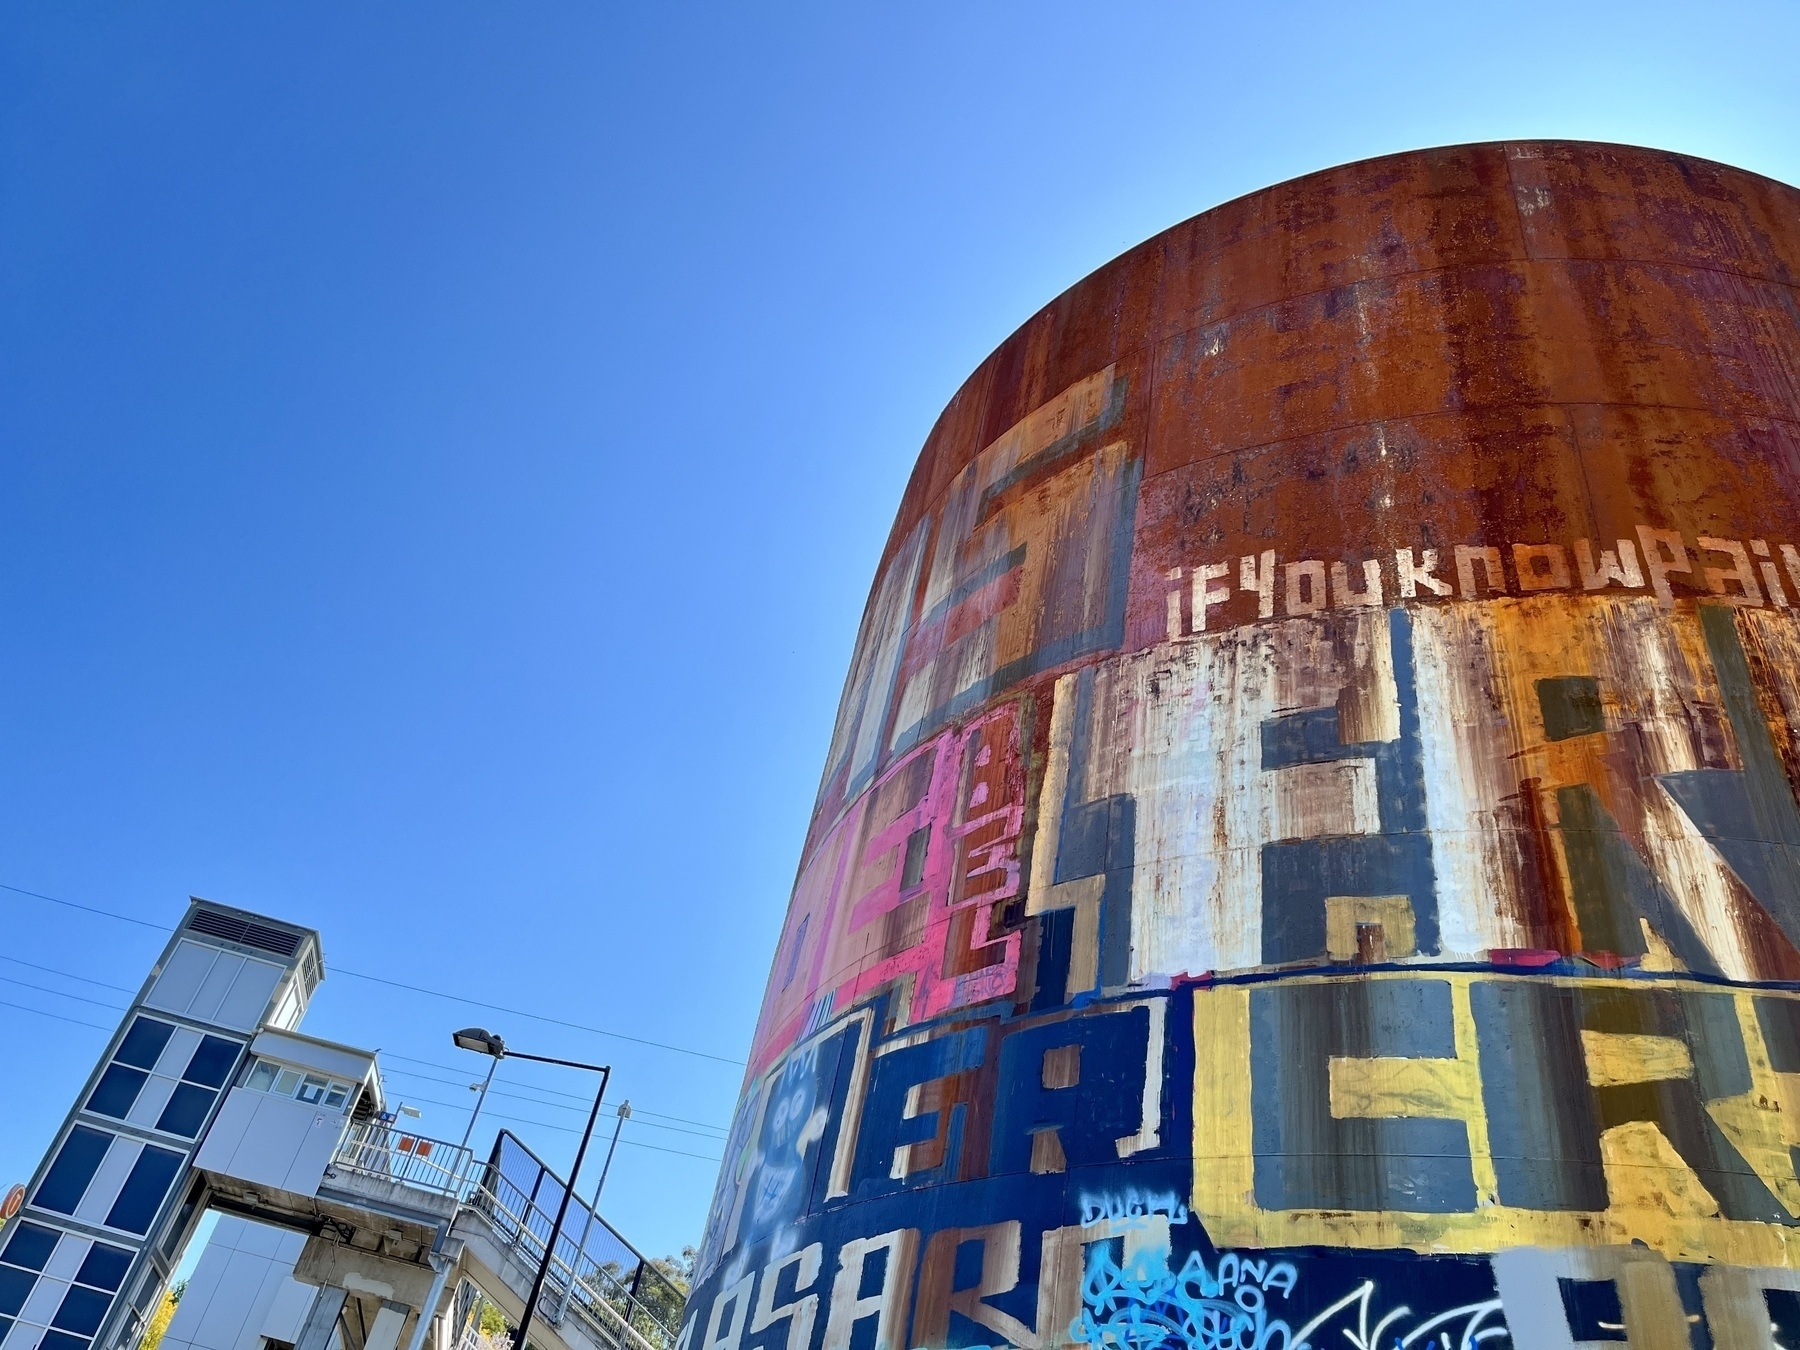 A railway lift shaft and staircase next to a rusty water tank against a blue sky